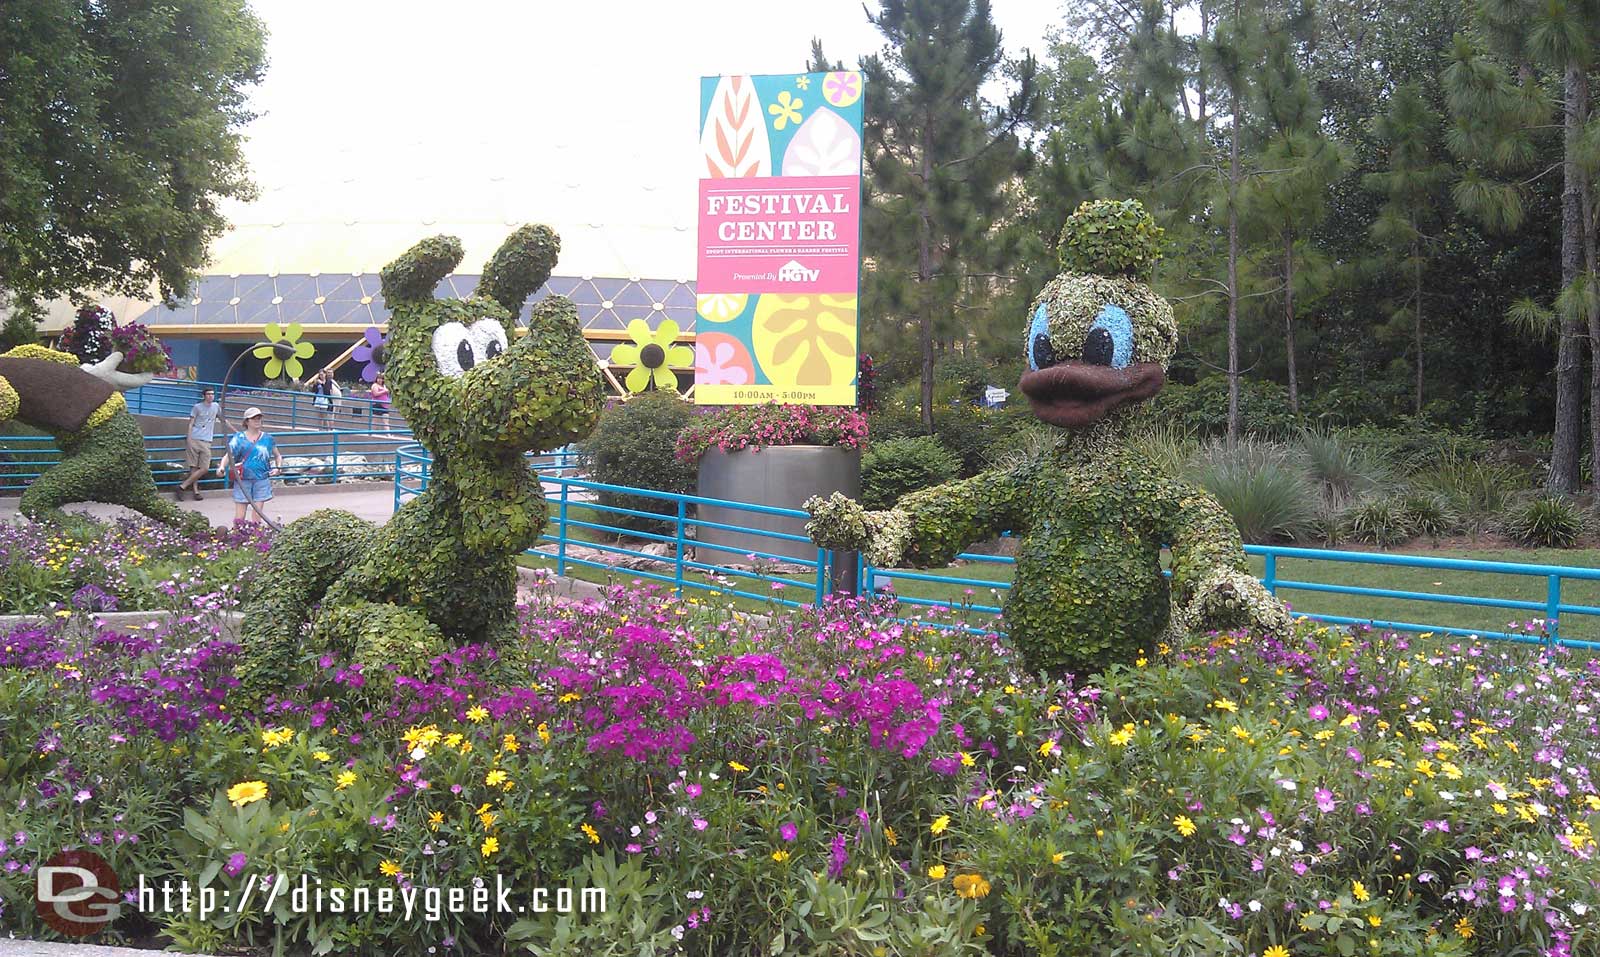 Donald and Pluto topiaries near the Festival Center